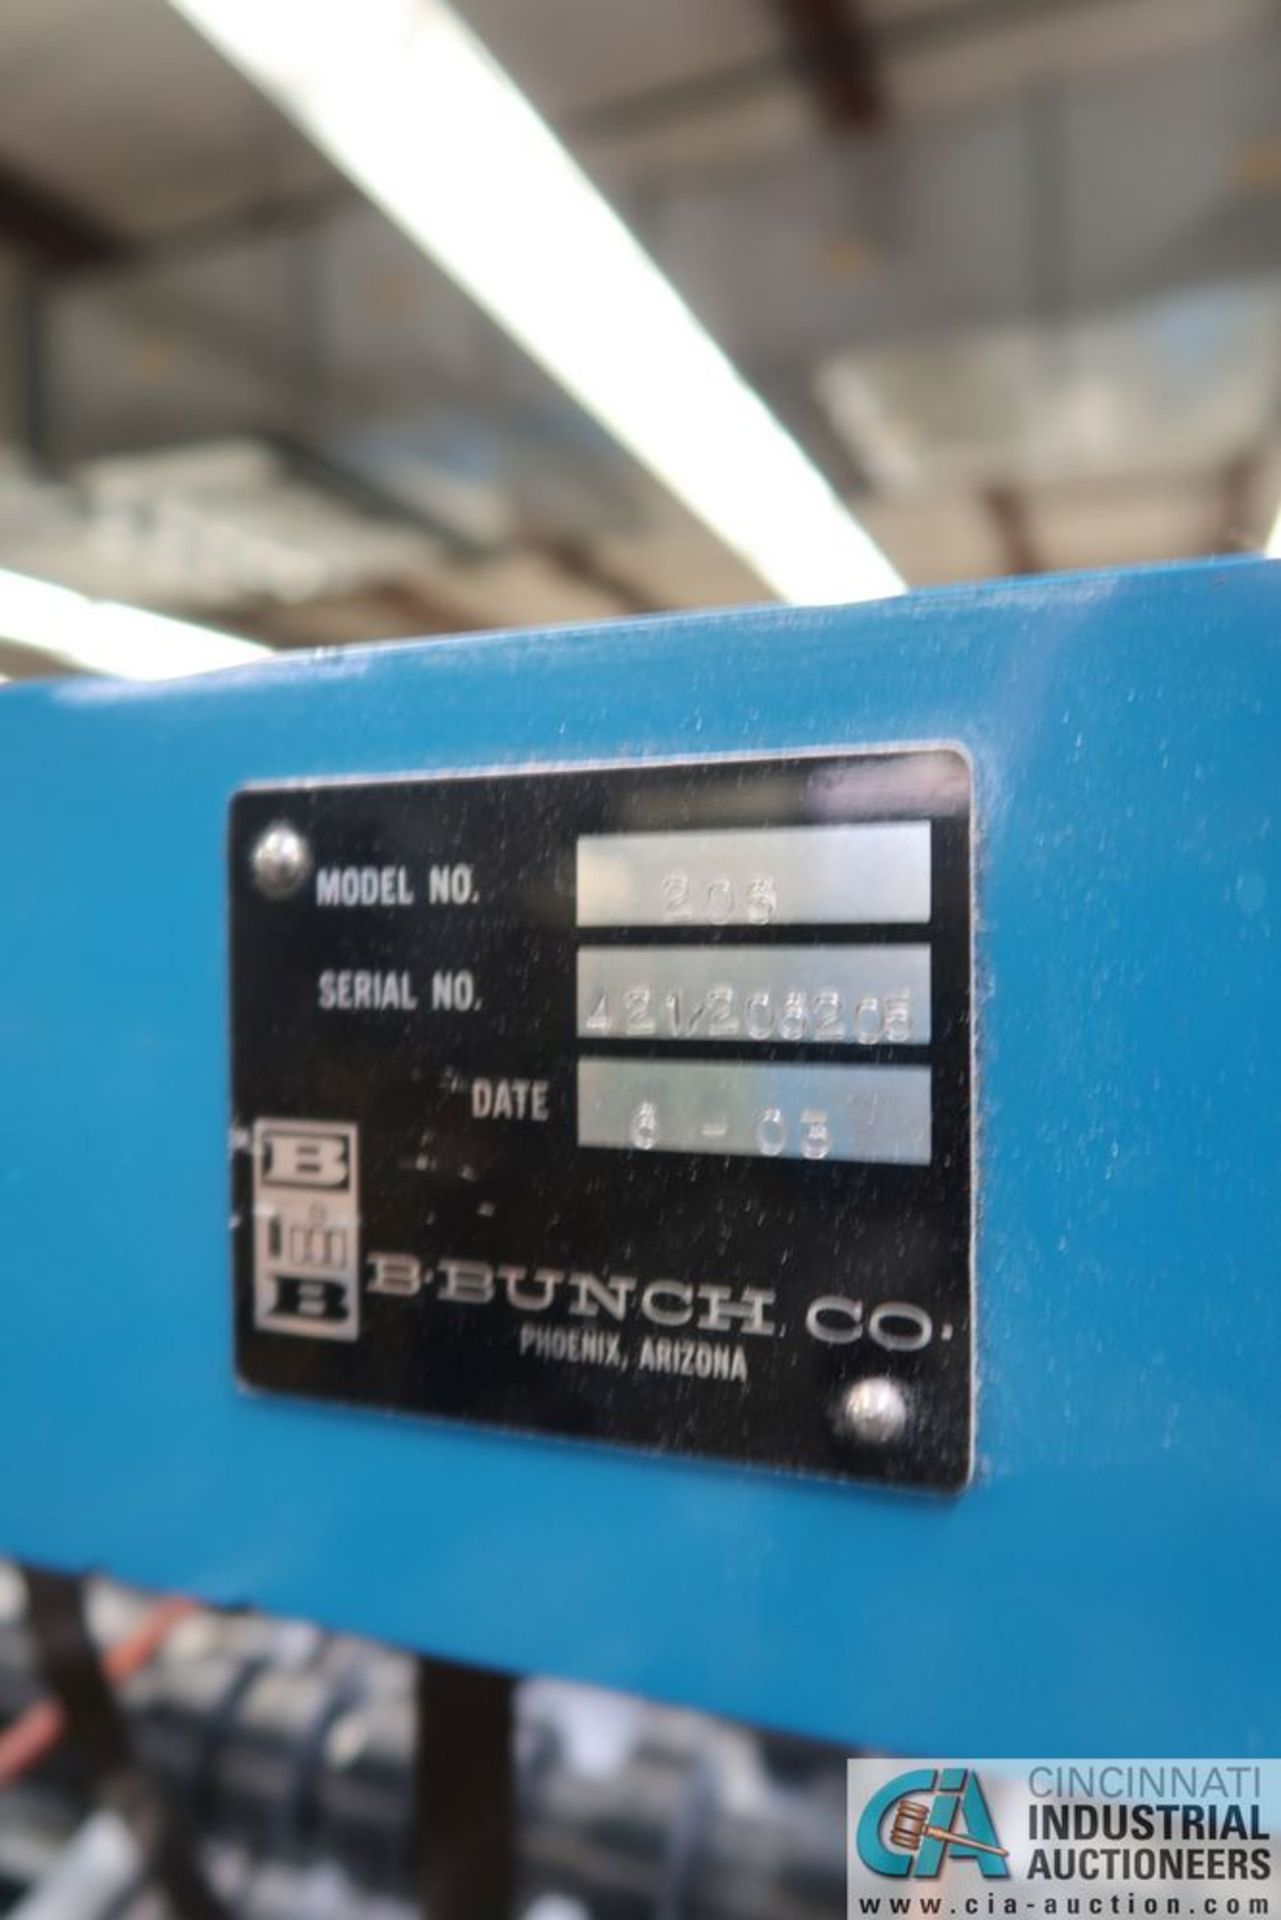 B. BUNCH CO. MODEL 206 SHEETER; S/N 421/206205, **Loading Fee Due the "ERRA" JAS Graphics, $150.00** - Image 8 of 8